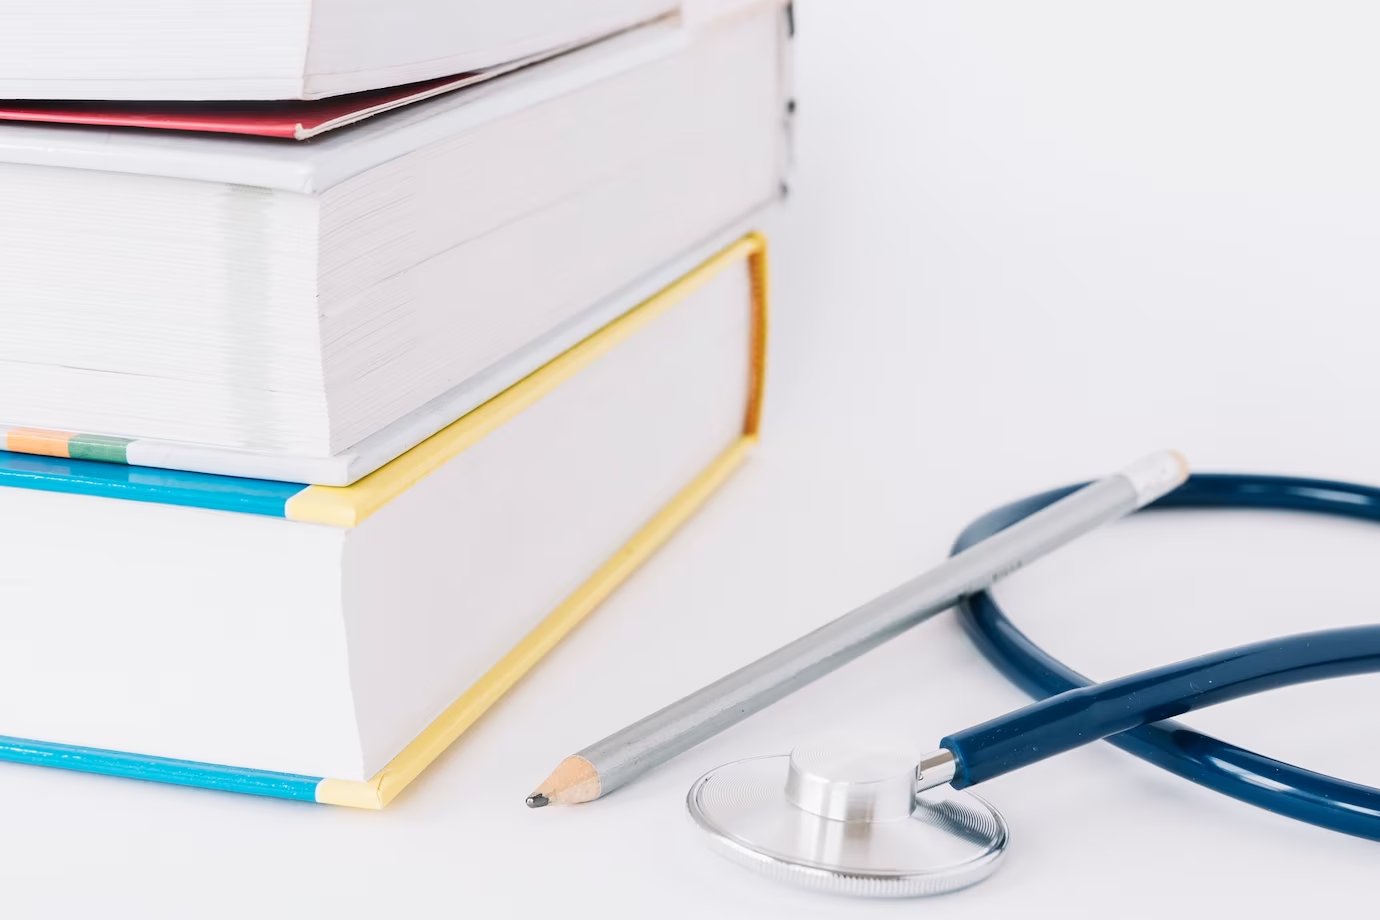 A stethoscope, pencil, and stack of books on a white surface - the essentials for applying to UK medical school from the UAE.